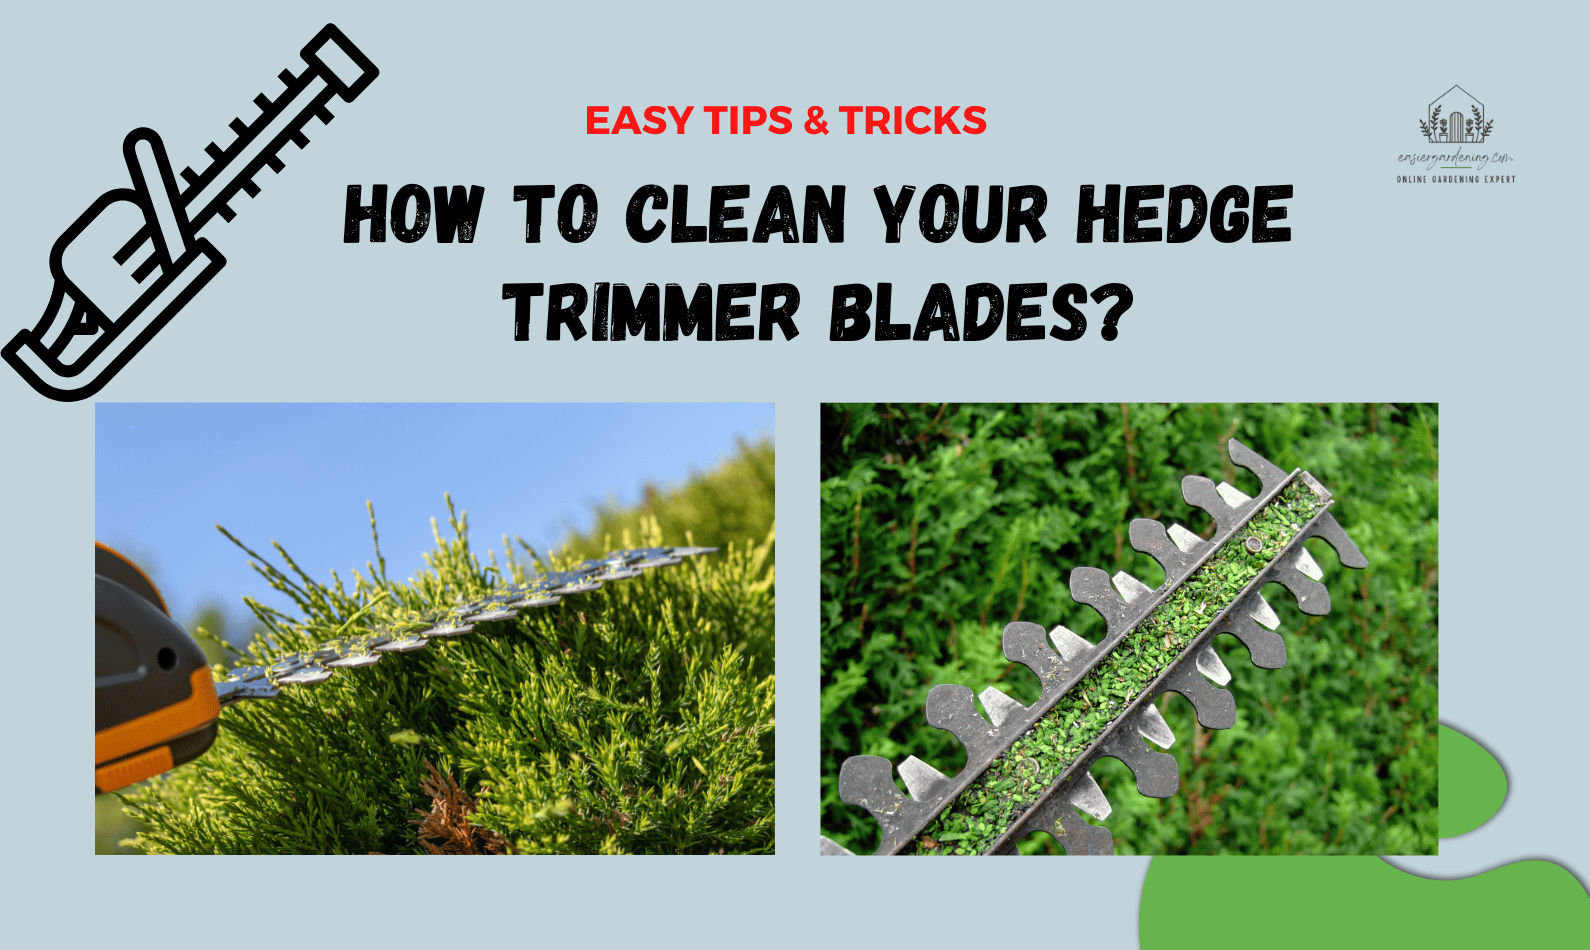 How to Clean Your Hedge Trimmer Blades?